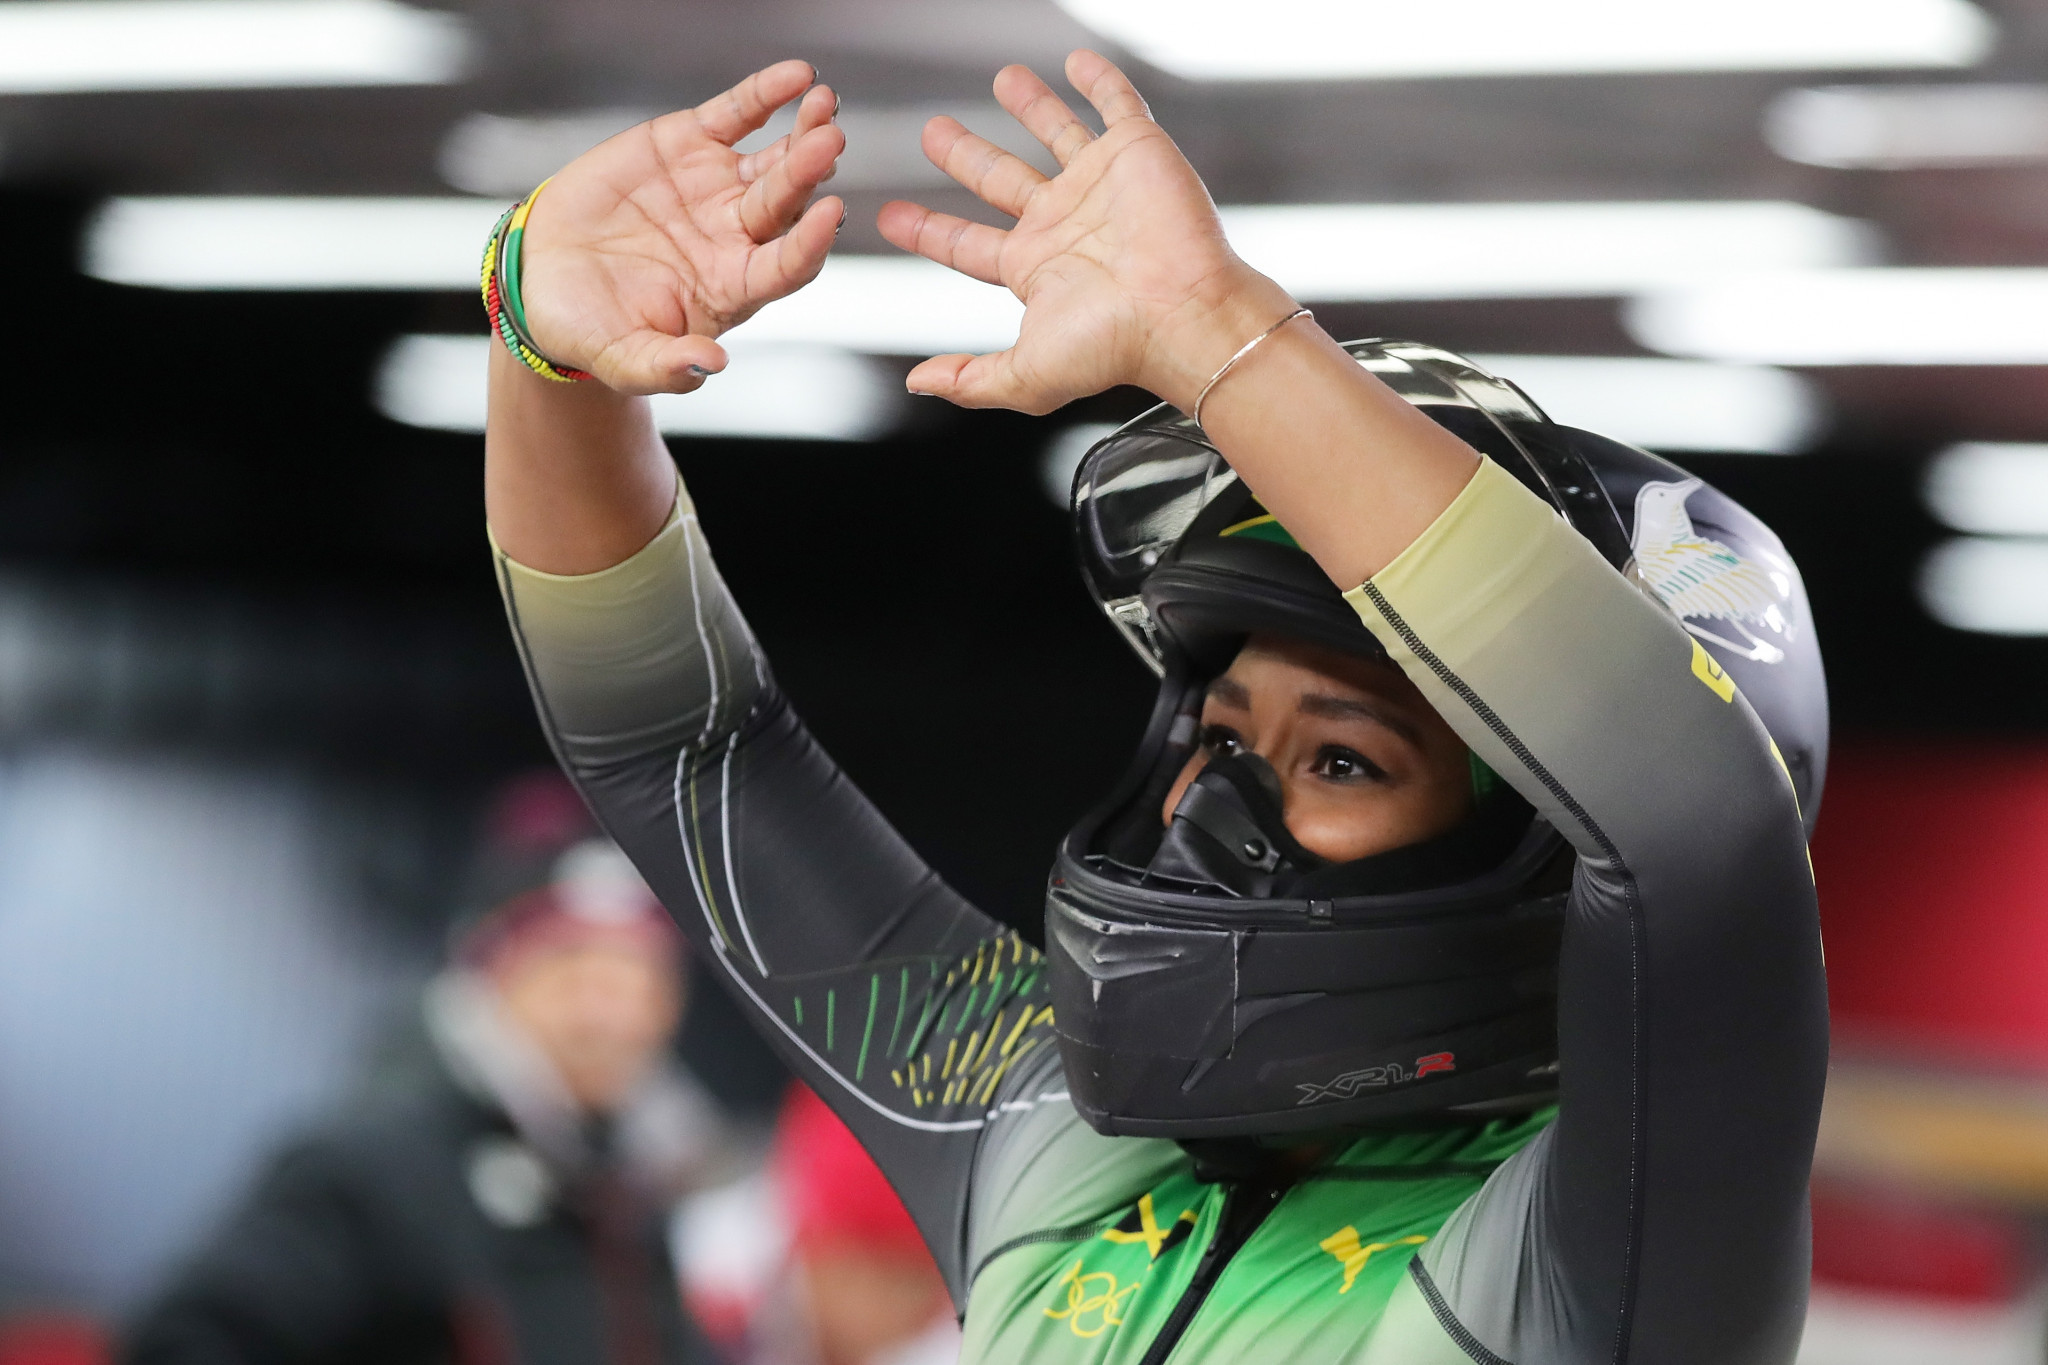 Jamaican fails in CAS appeal to secure two-woman bobsleigh spot at Beijing 2022